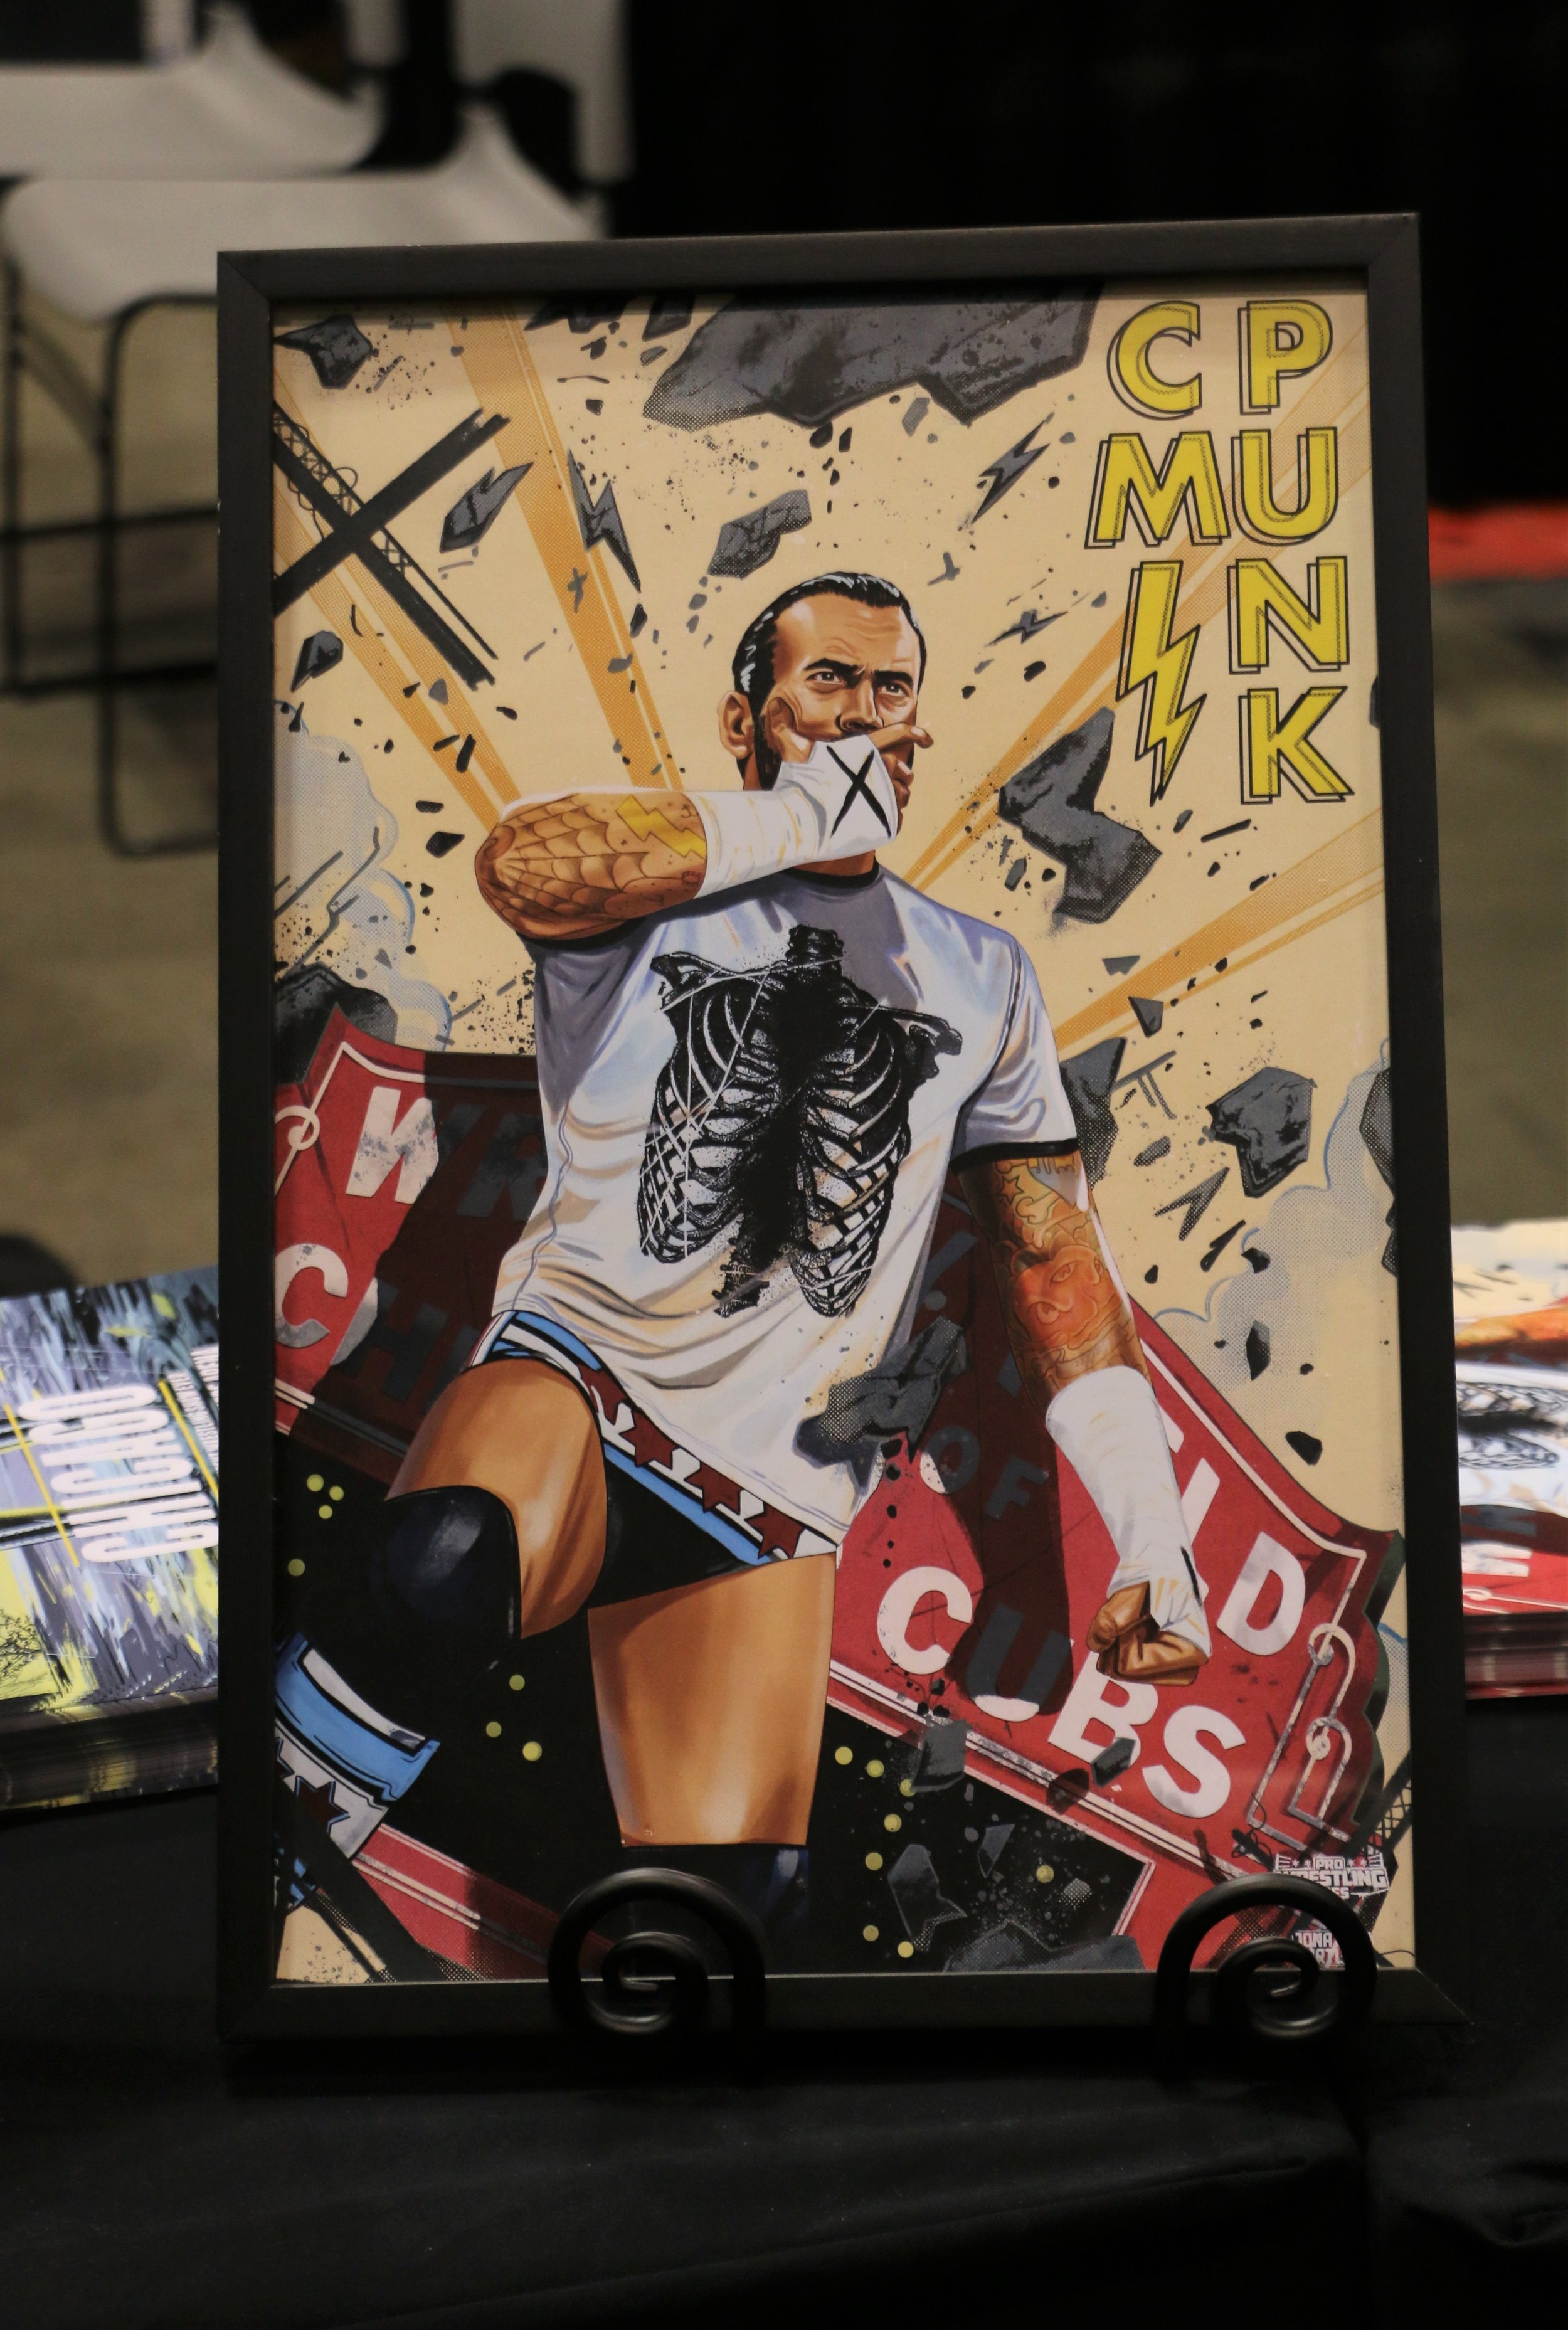  CM Punk portrait at the Pro Wrestling Tees booth. 